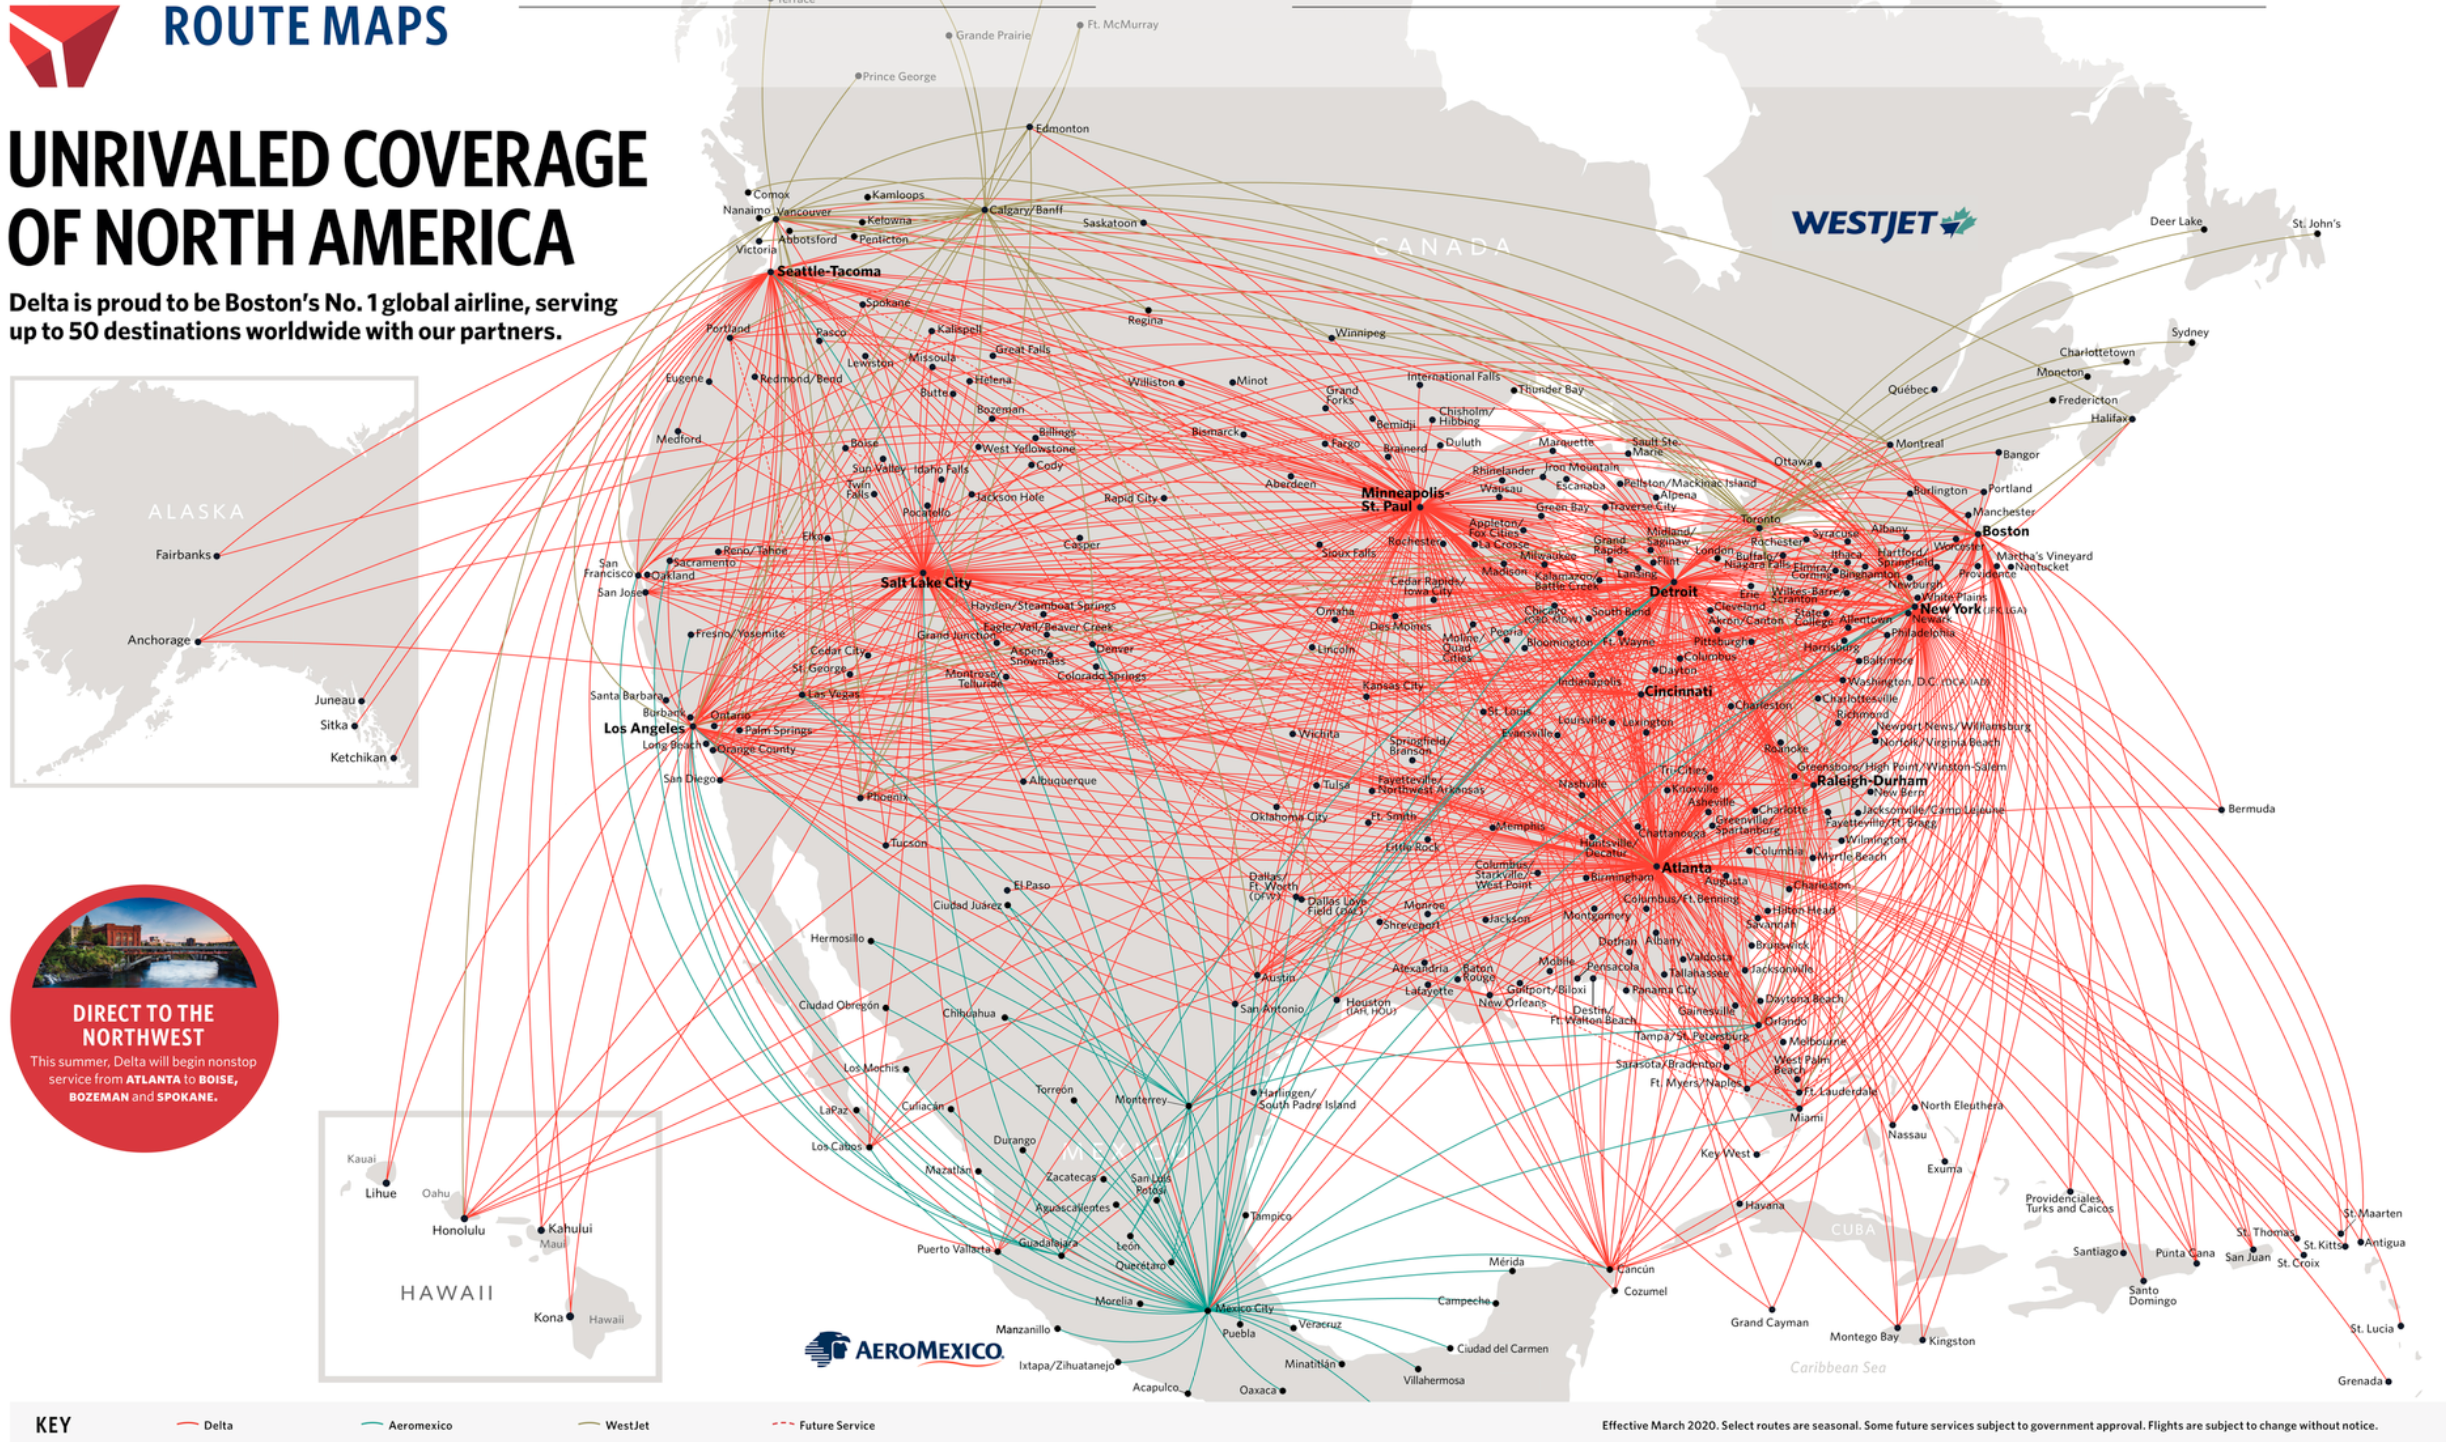 What will US airline route maps look like after the coronavirus?